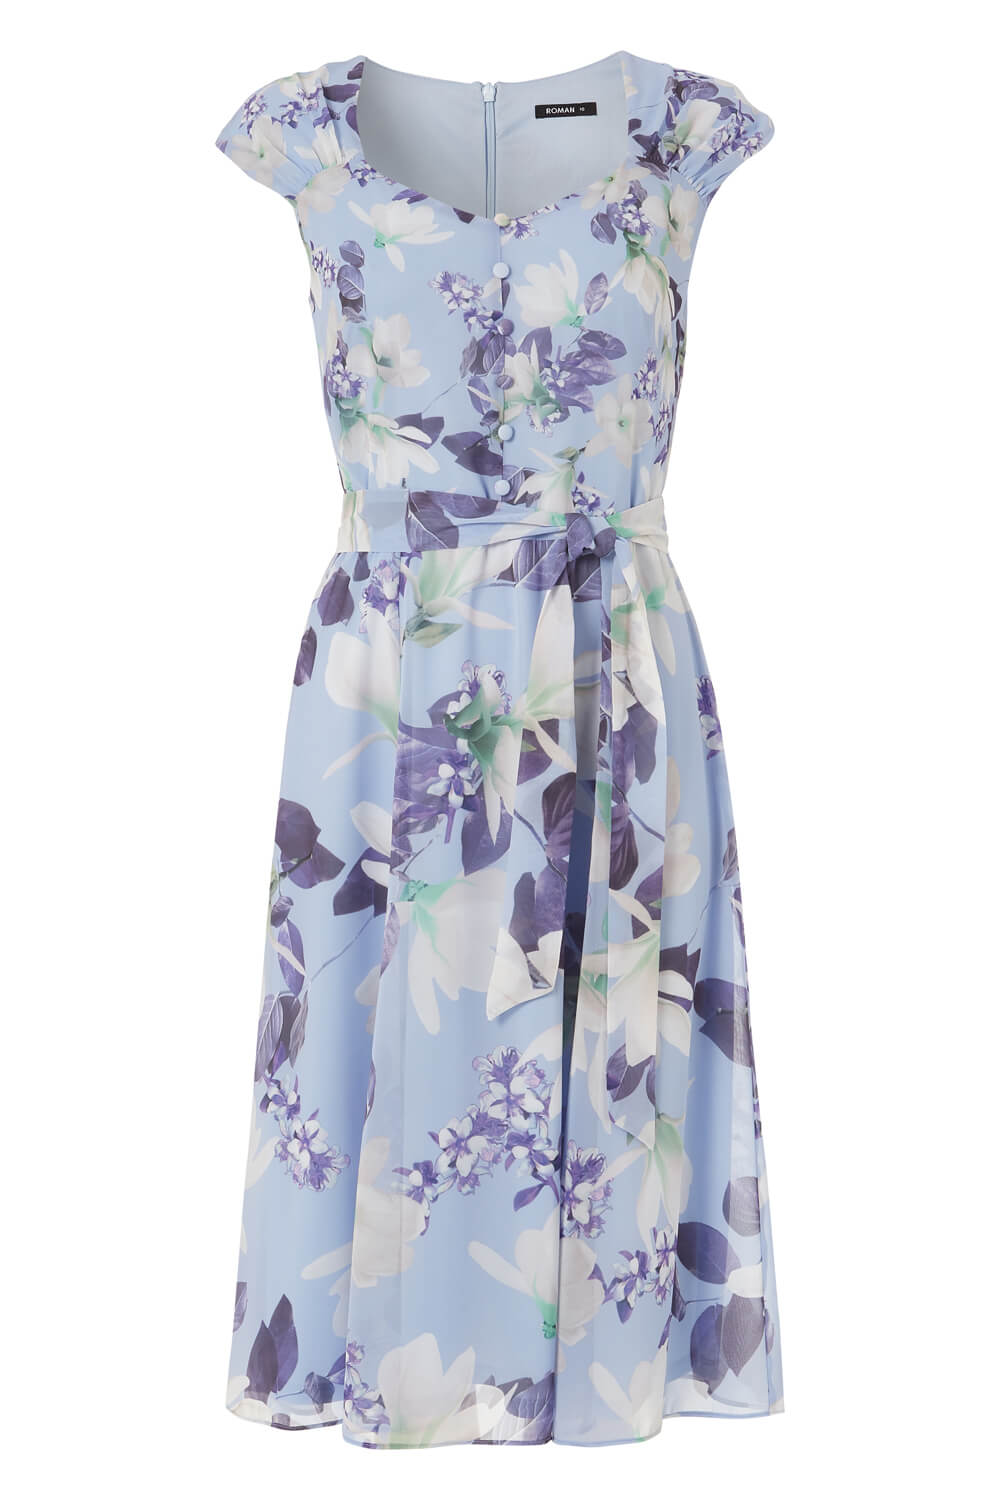 Lilac Floral Fit and Flare Belted Dress, Image 5 of 5